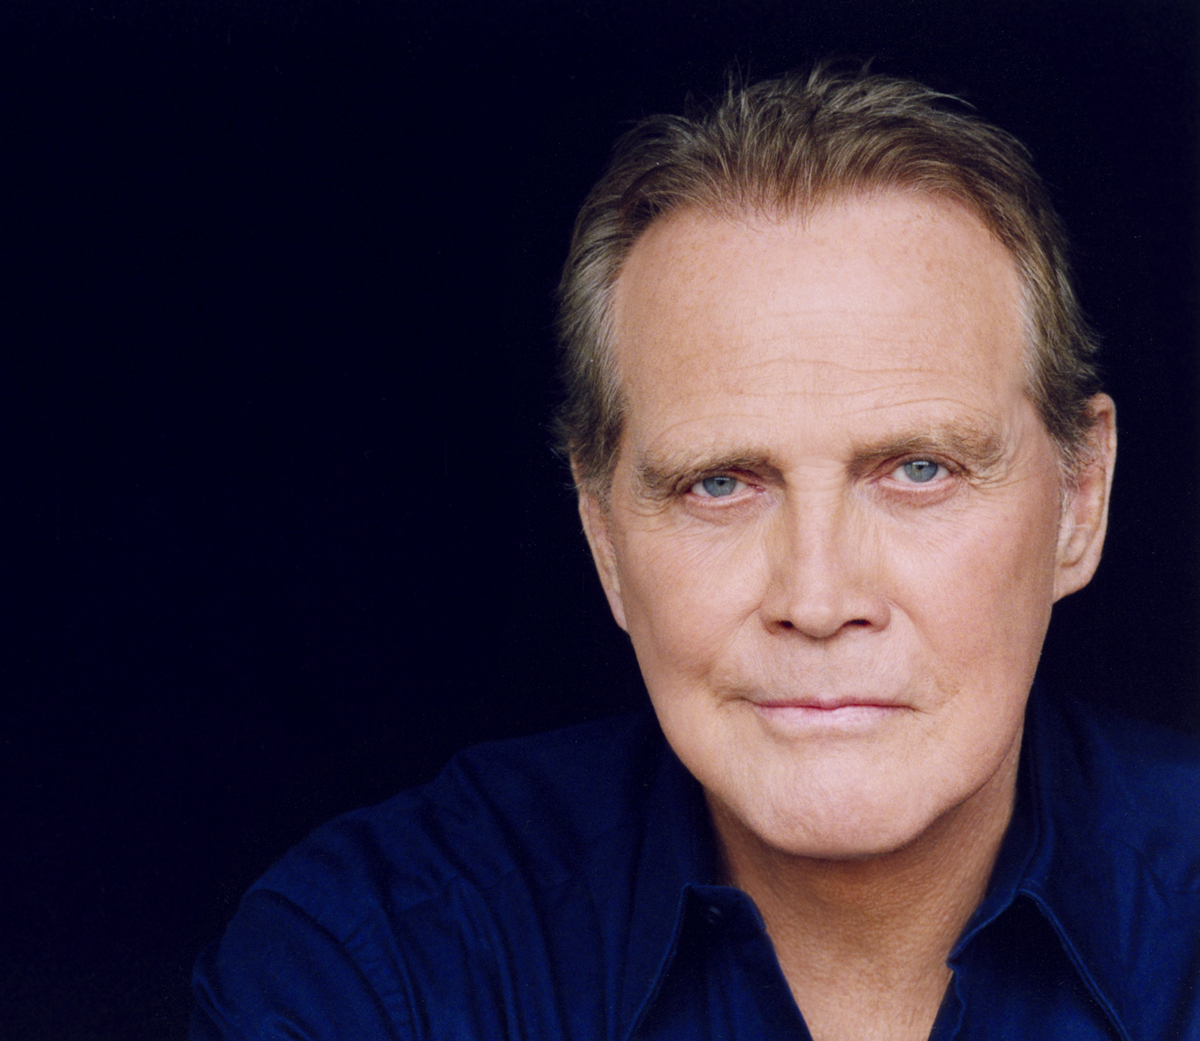 ← Lee Majors pictures.